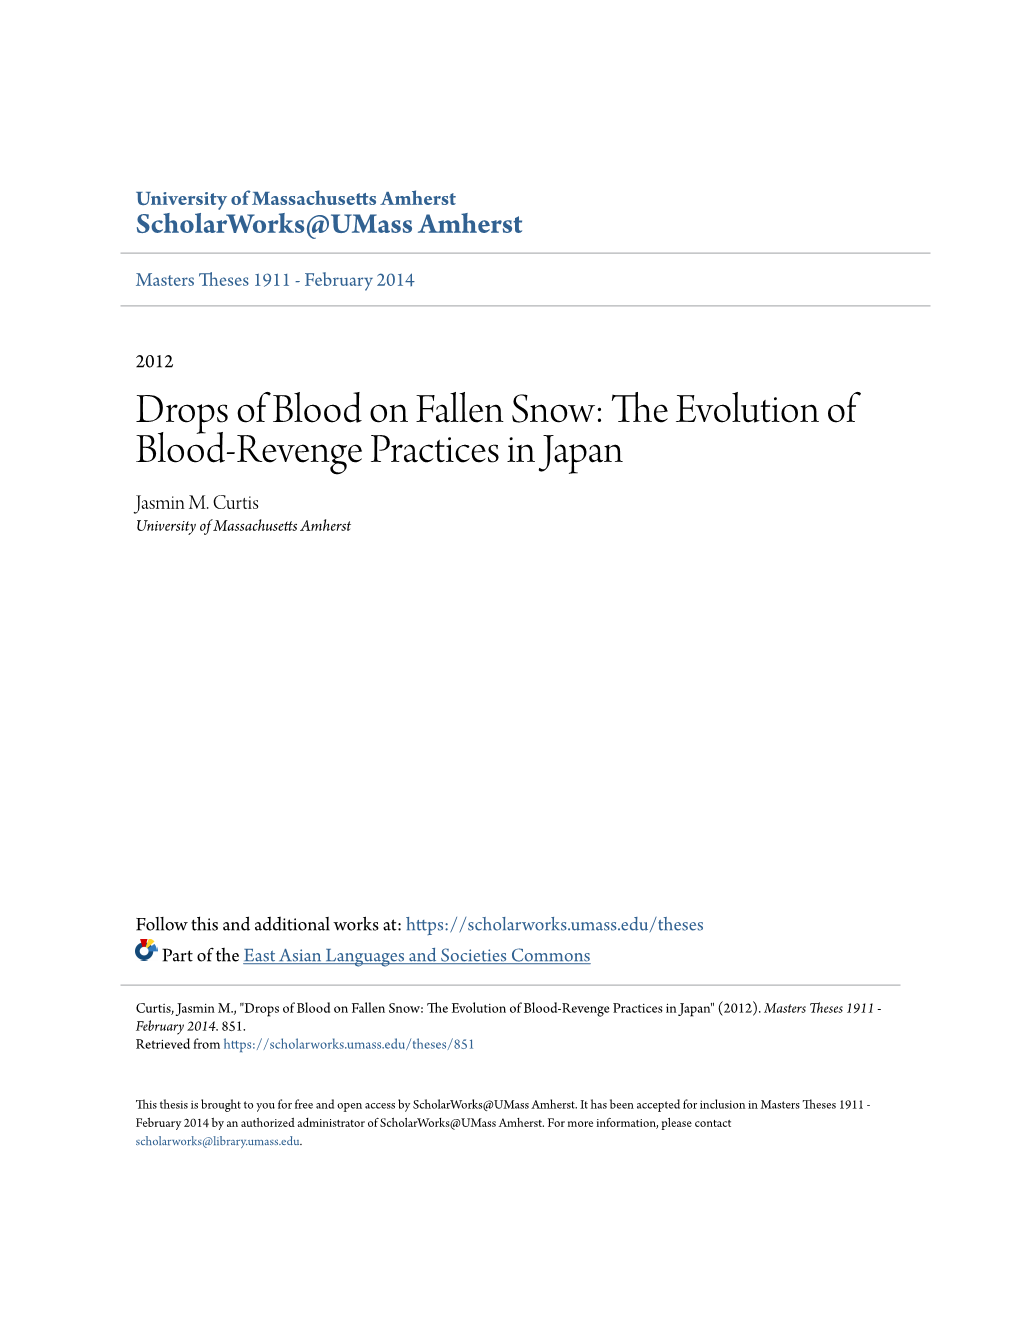 Drops of Blood on Fallen Snow: the Evolution of Blood-Revenge Practices in Japan